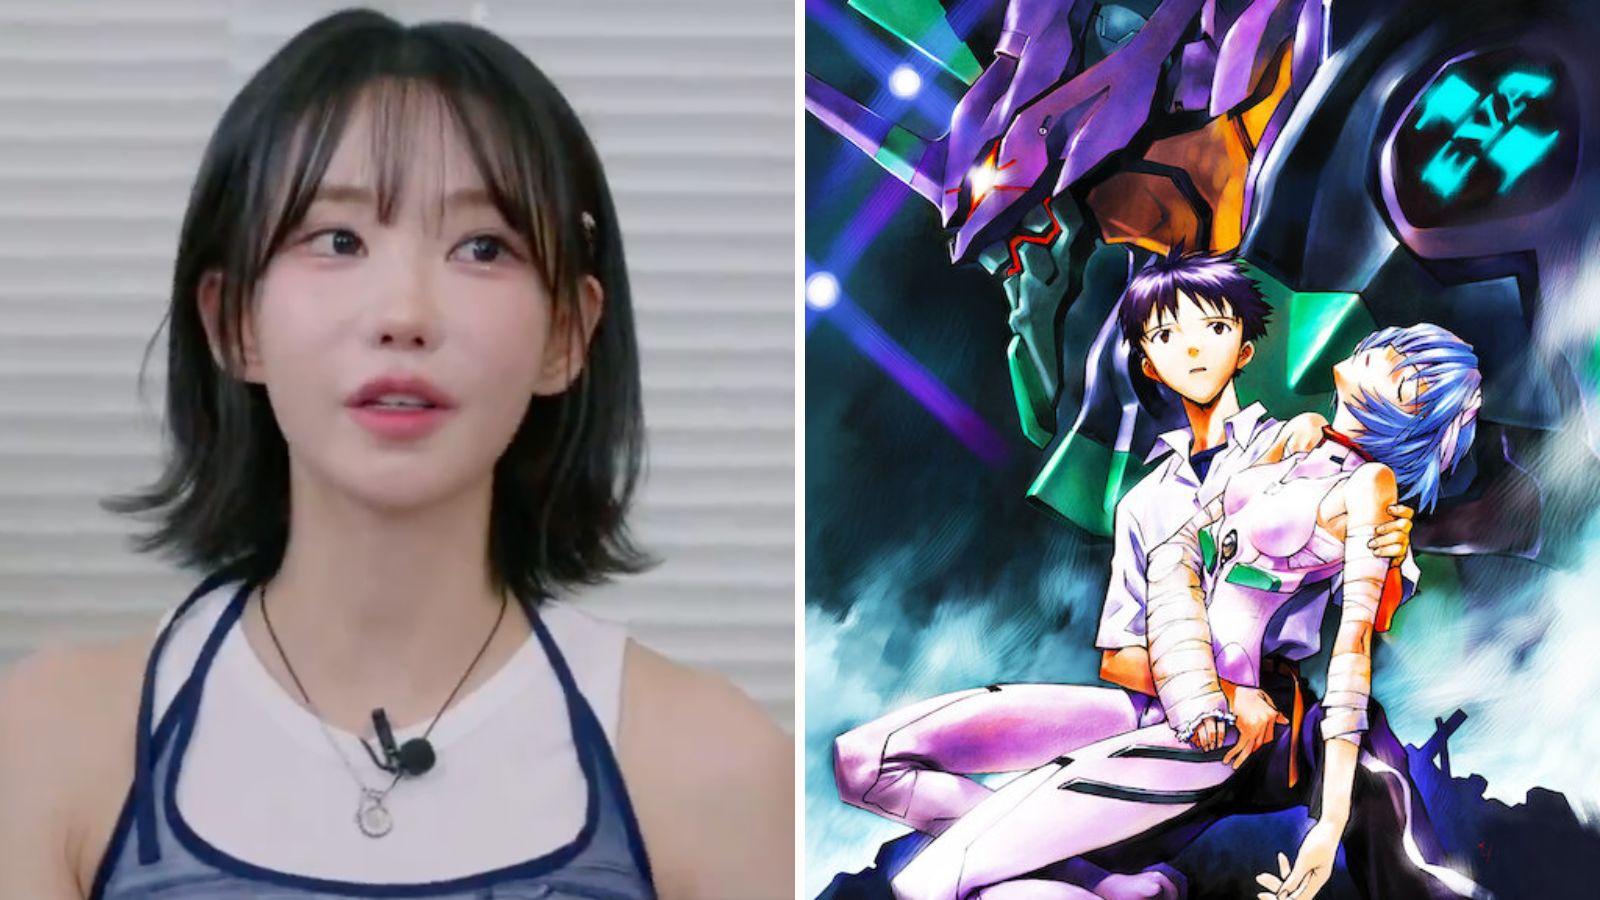 Kpop idol reveals obsession with Evangelion